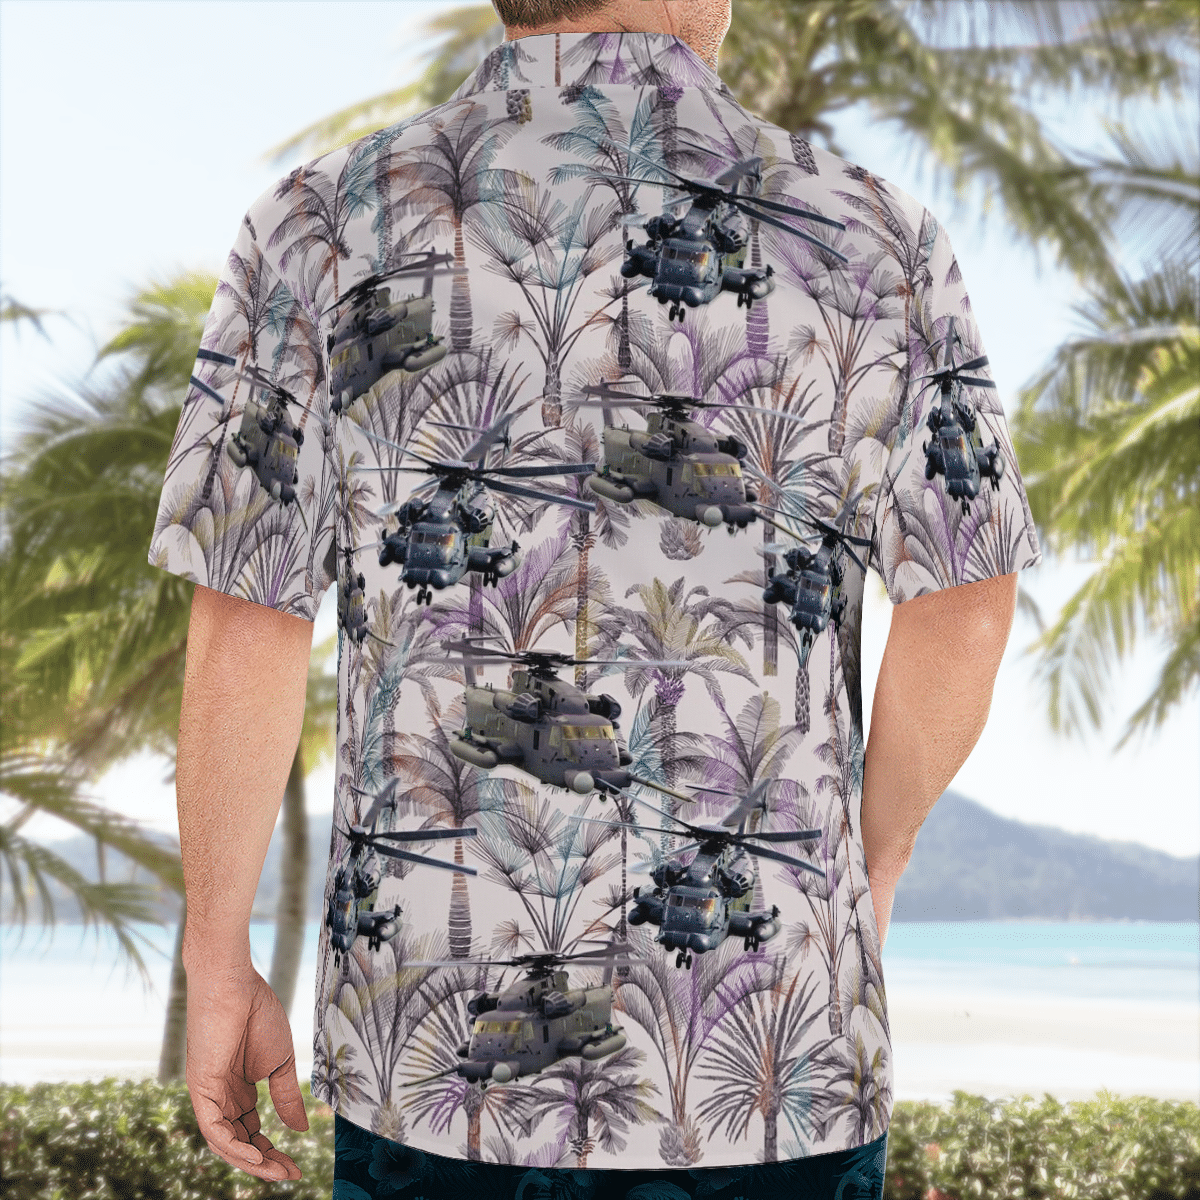 NEW Sikorsky MH-53 Pave Low Hawaii Shirt2